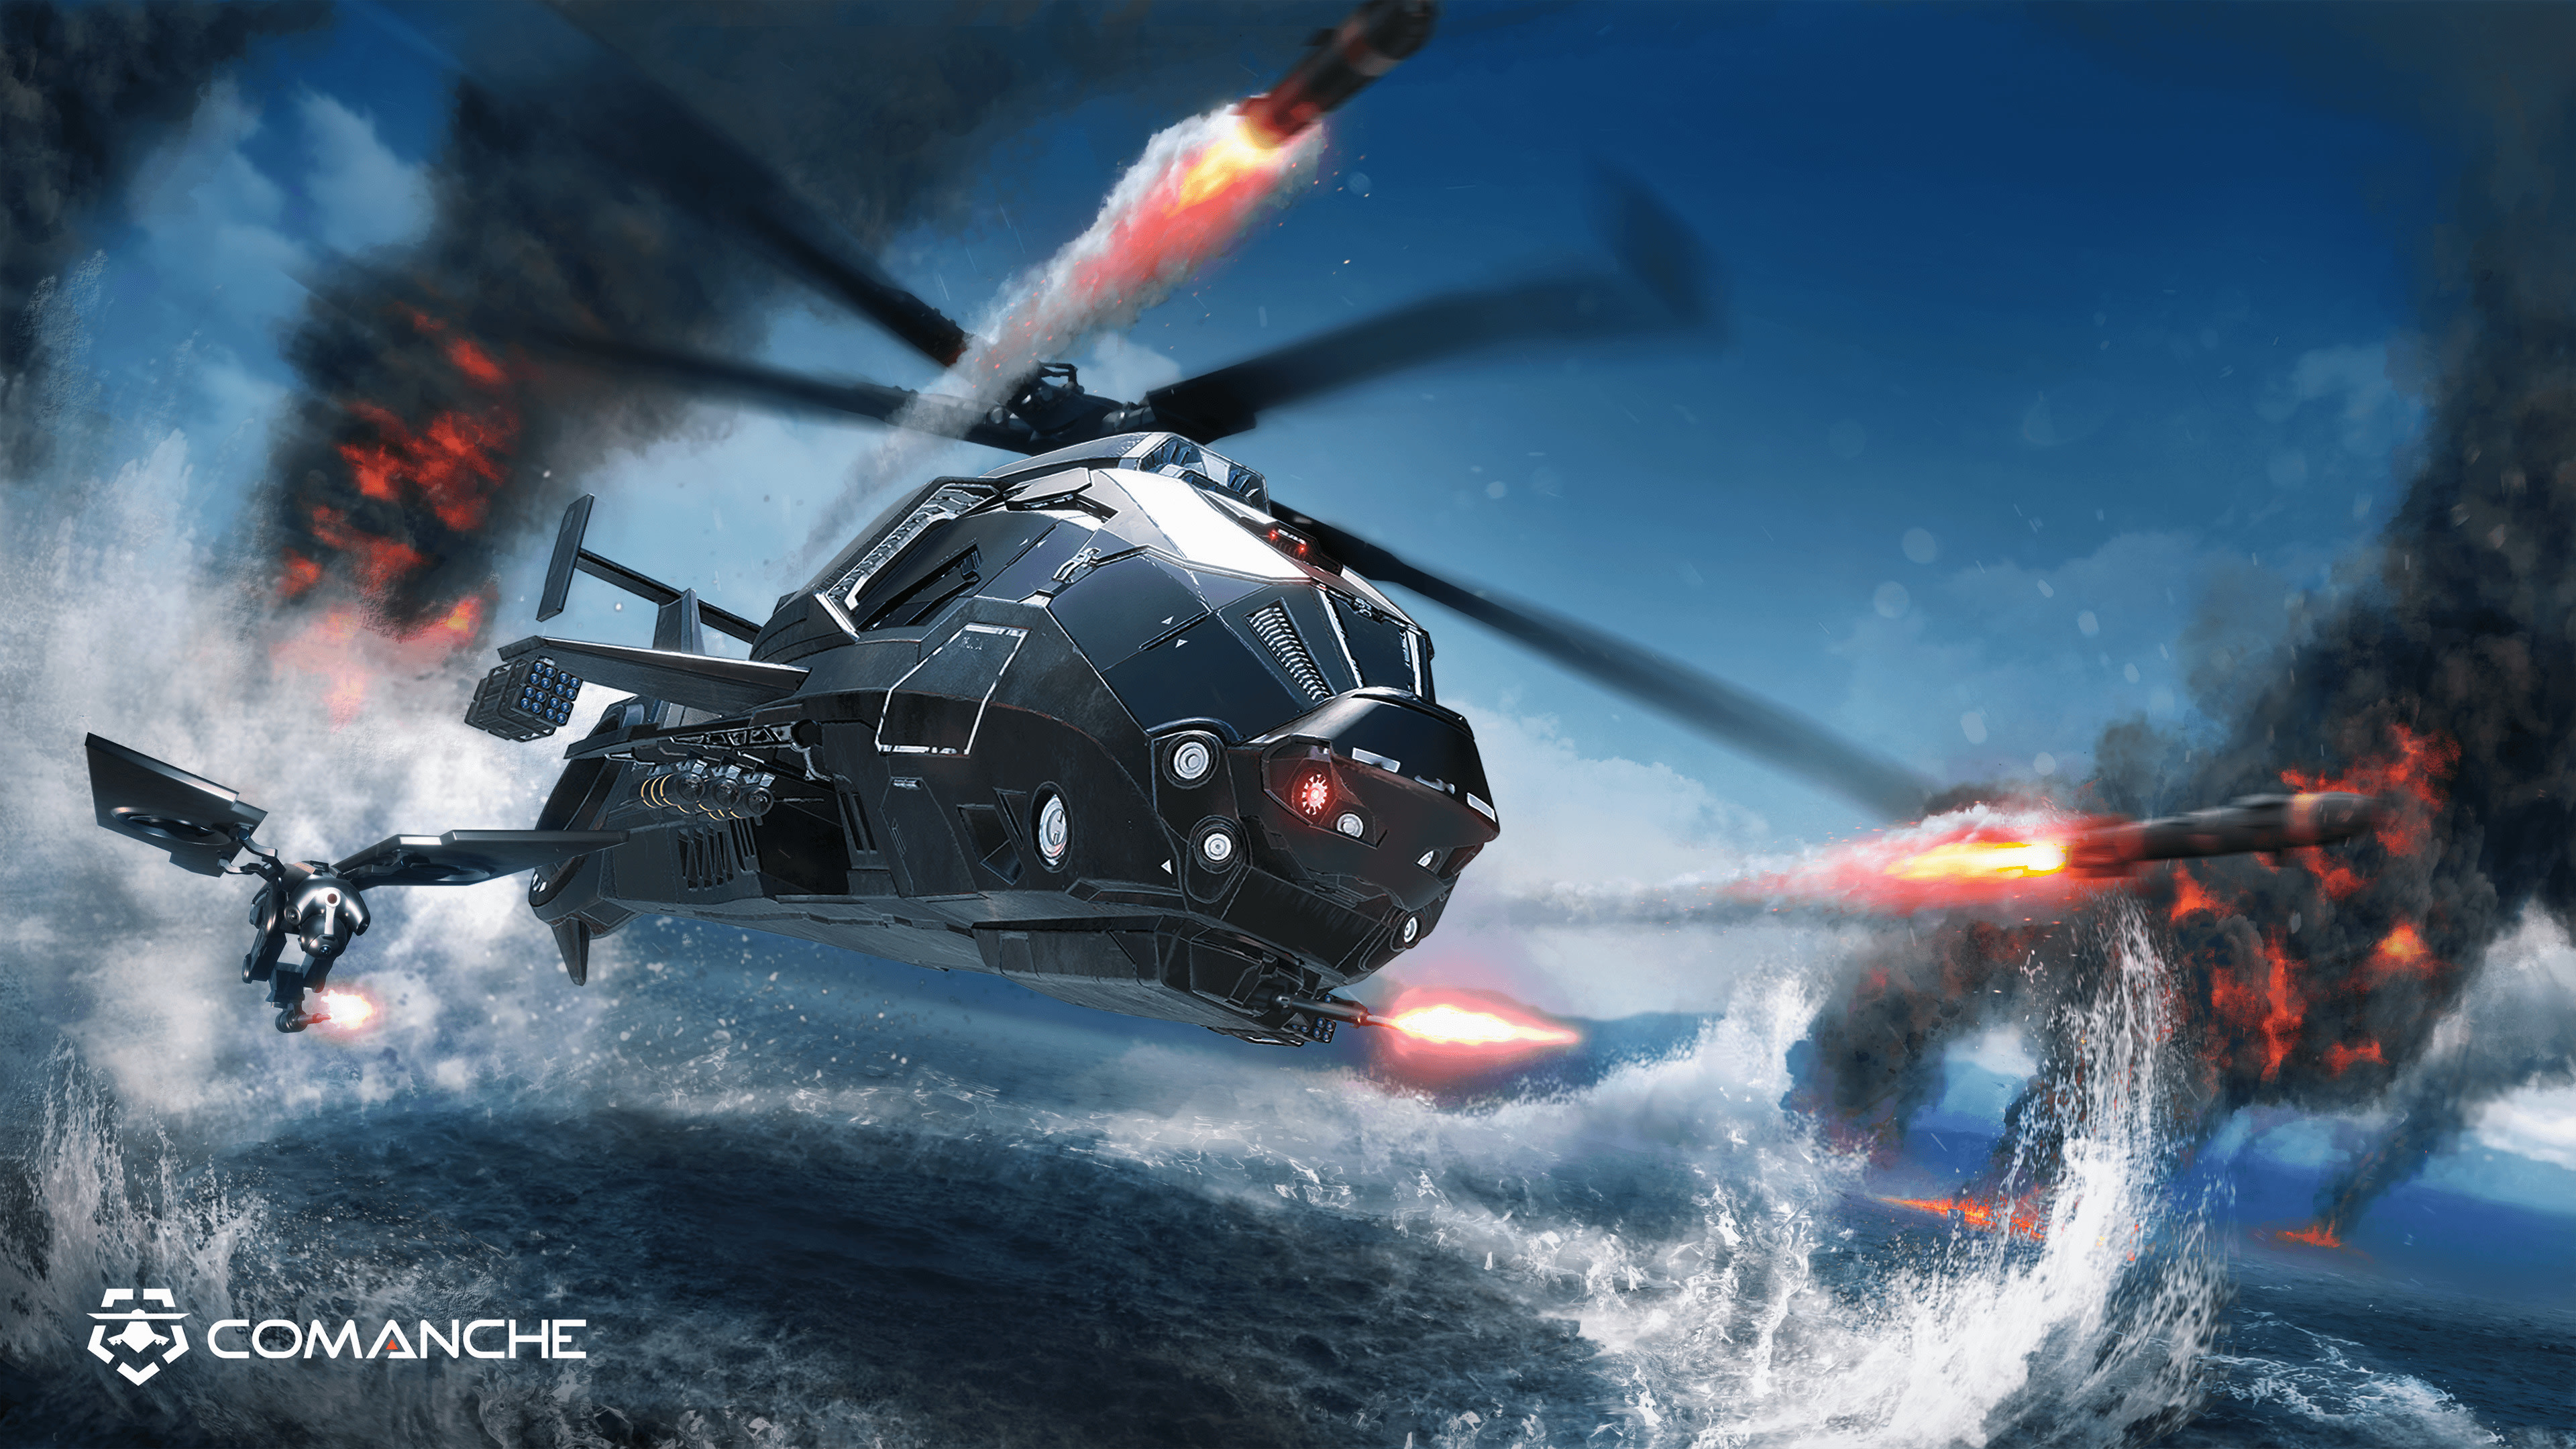 Comanche Video Game Helicopter Attack Helicopter 3840x2160